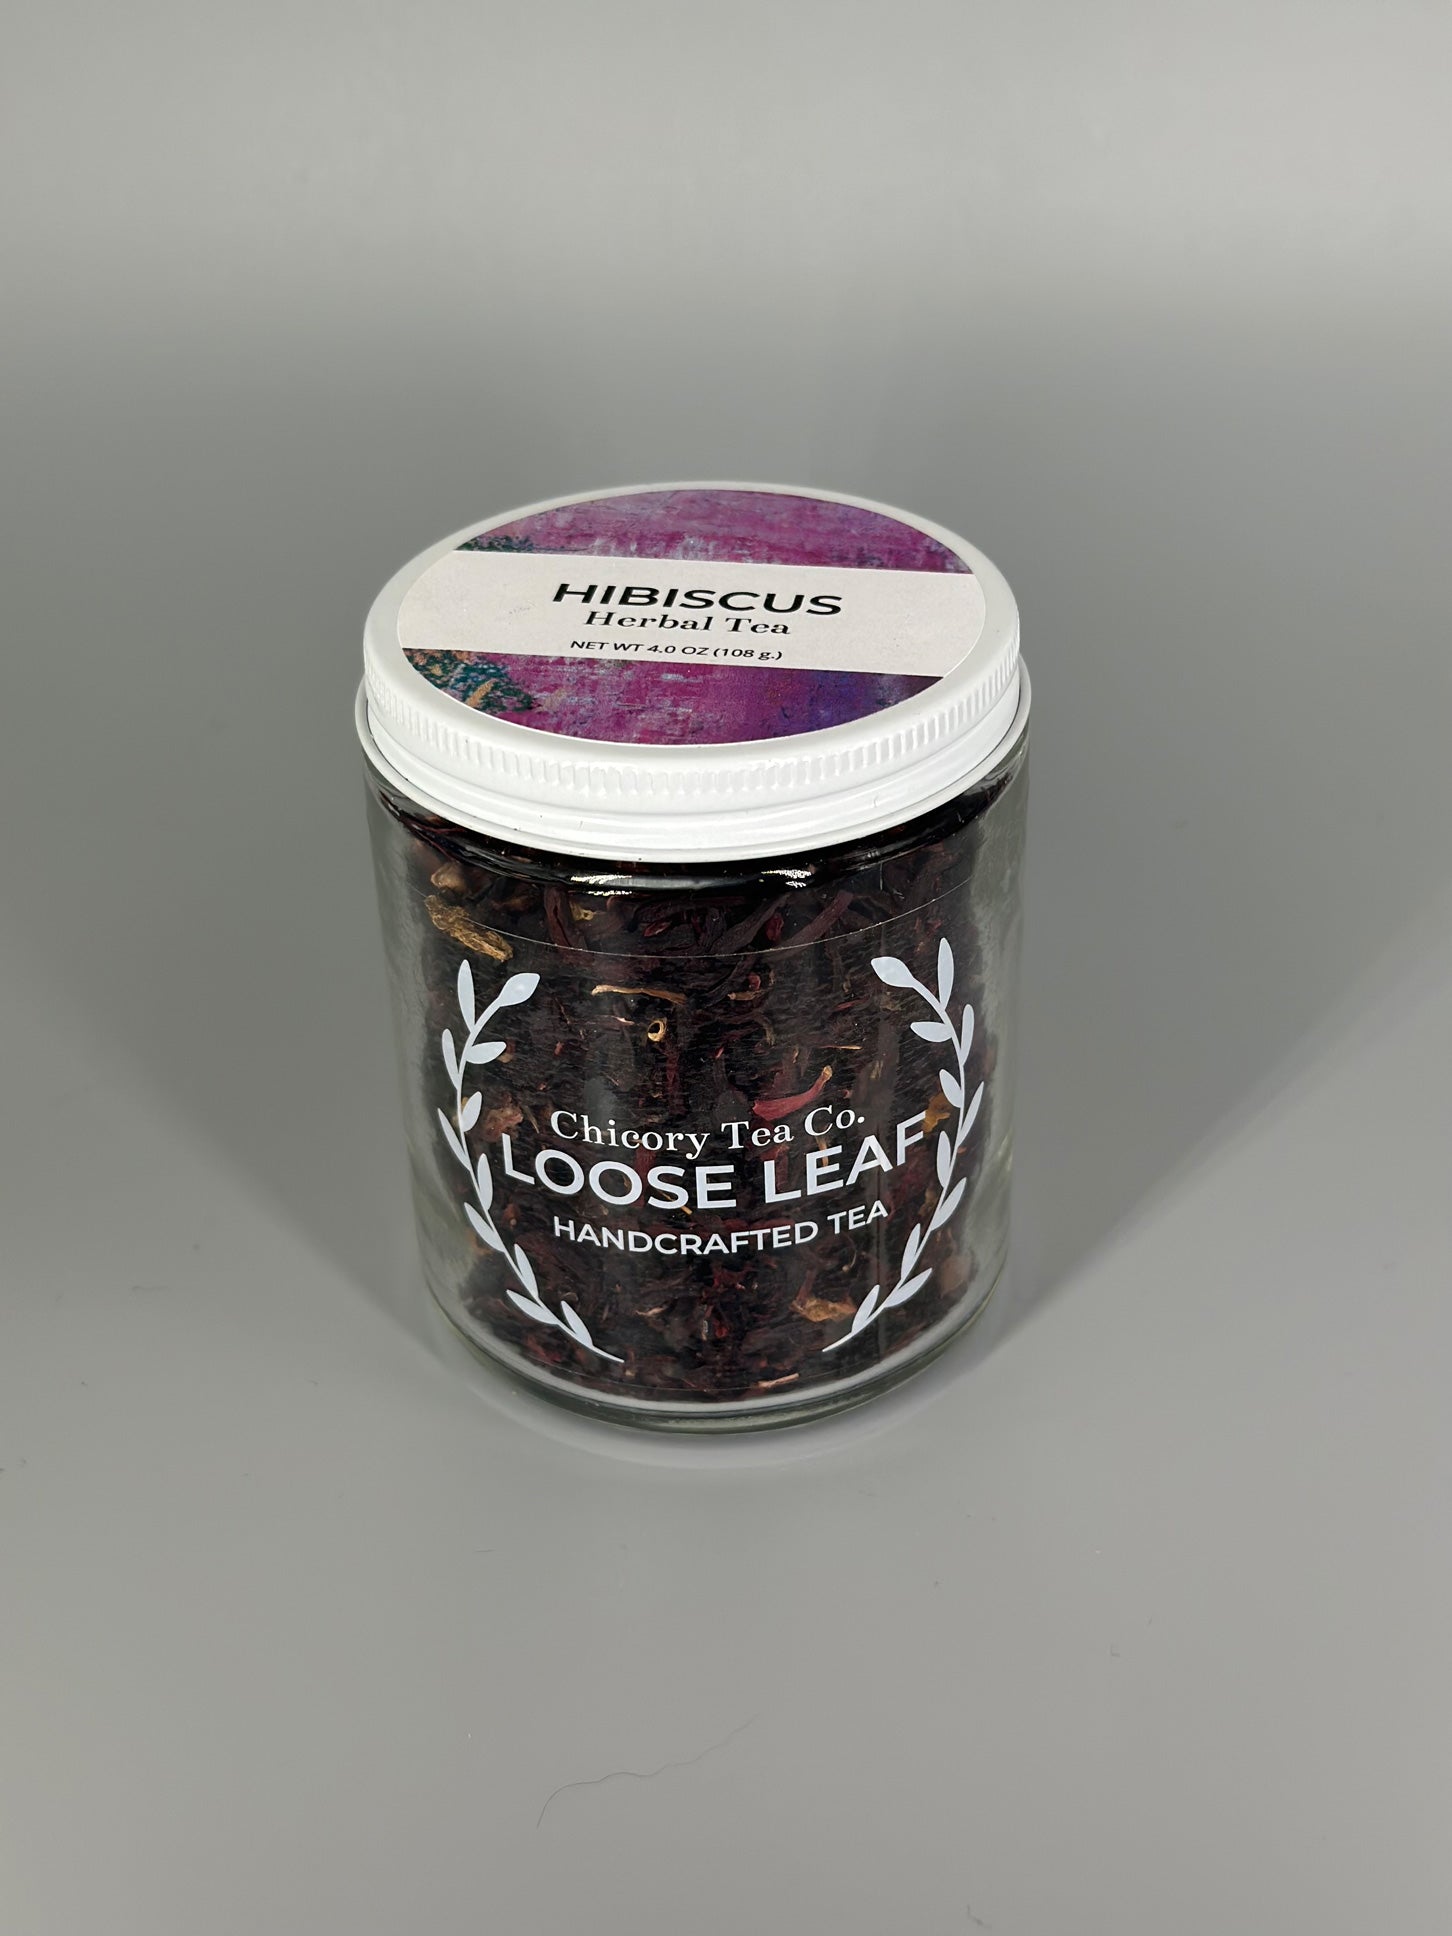 Chicory Tea Co.'s Hibiscus Herbal Tea, view from the front